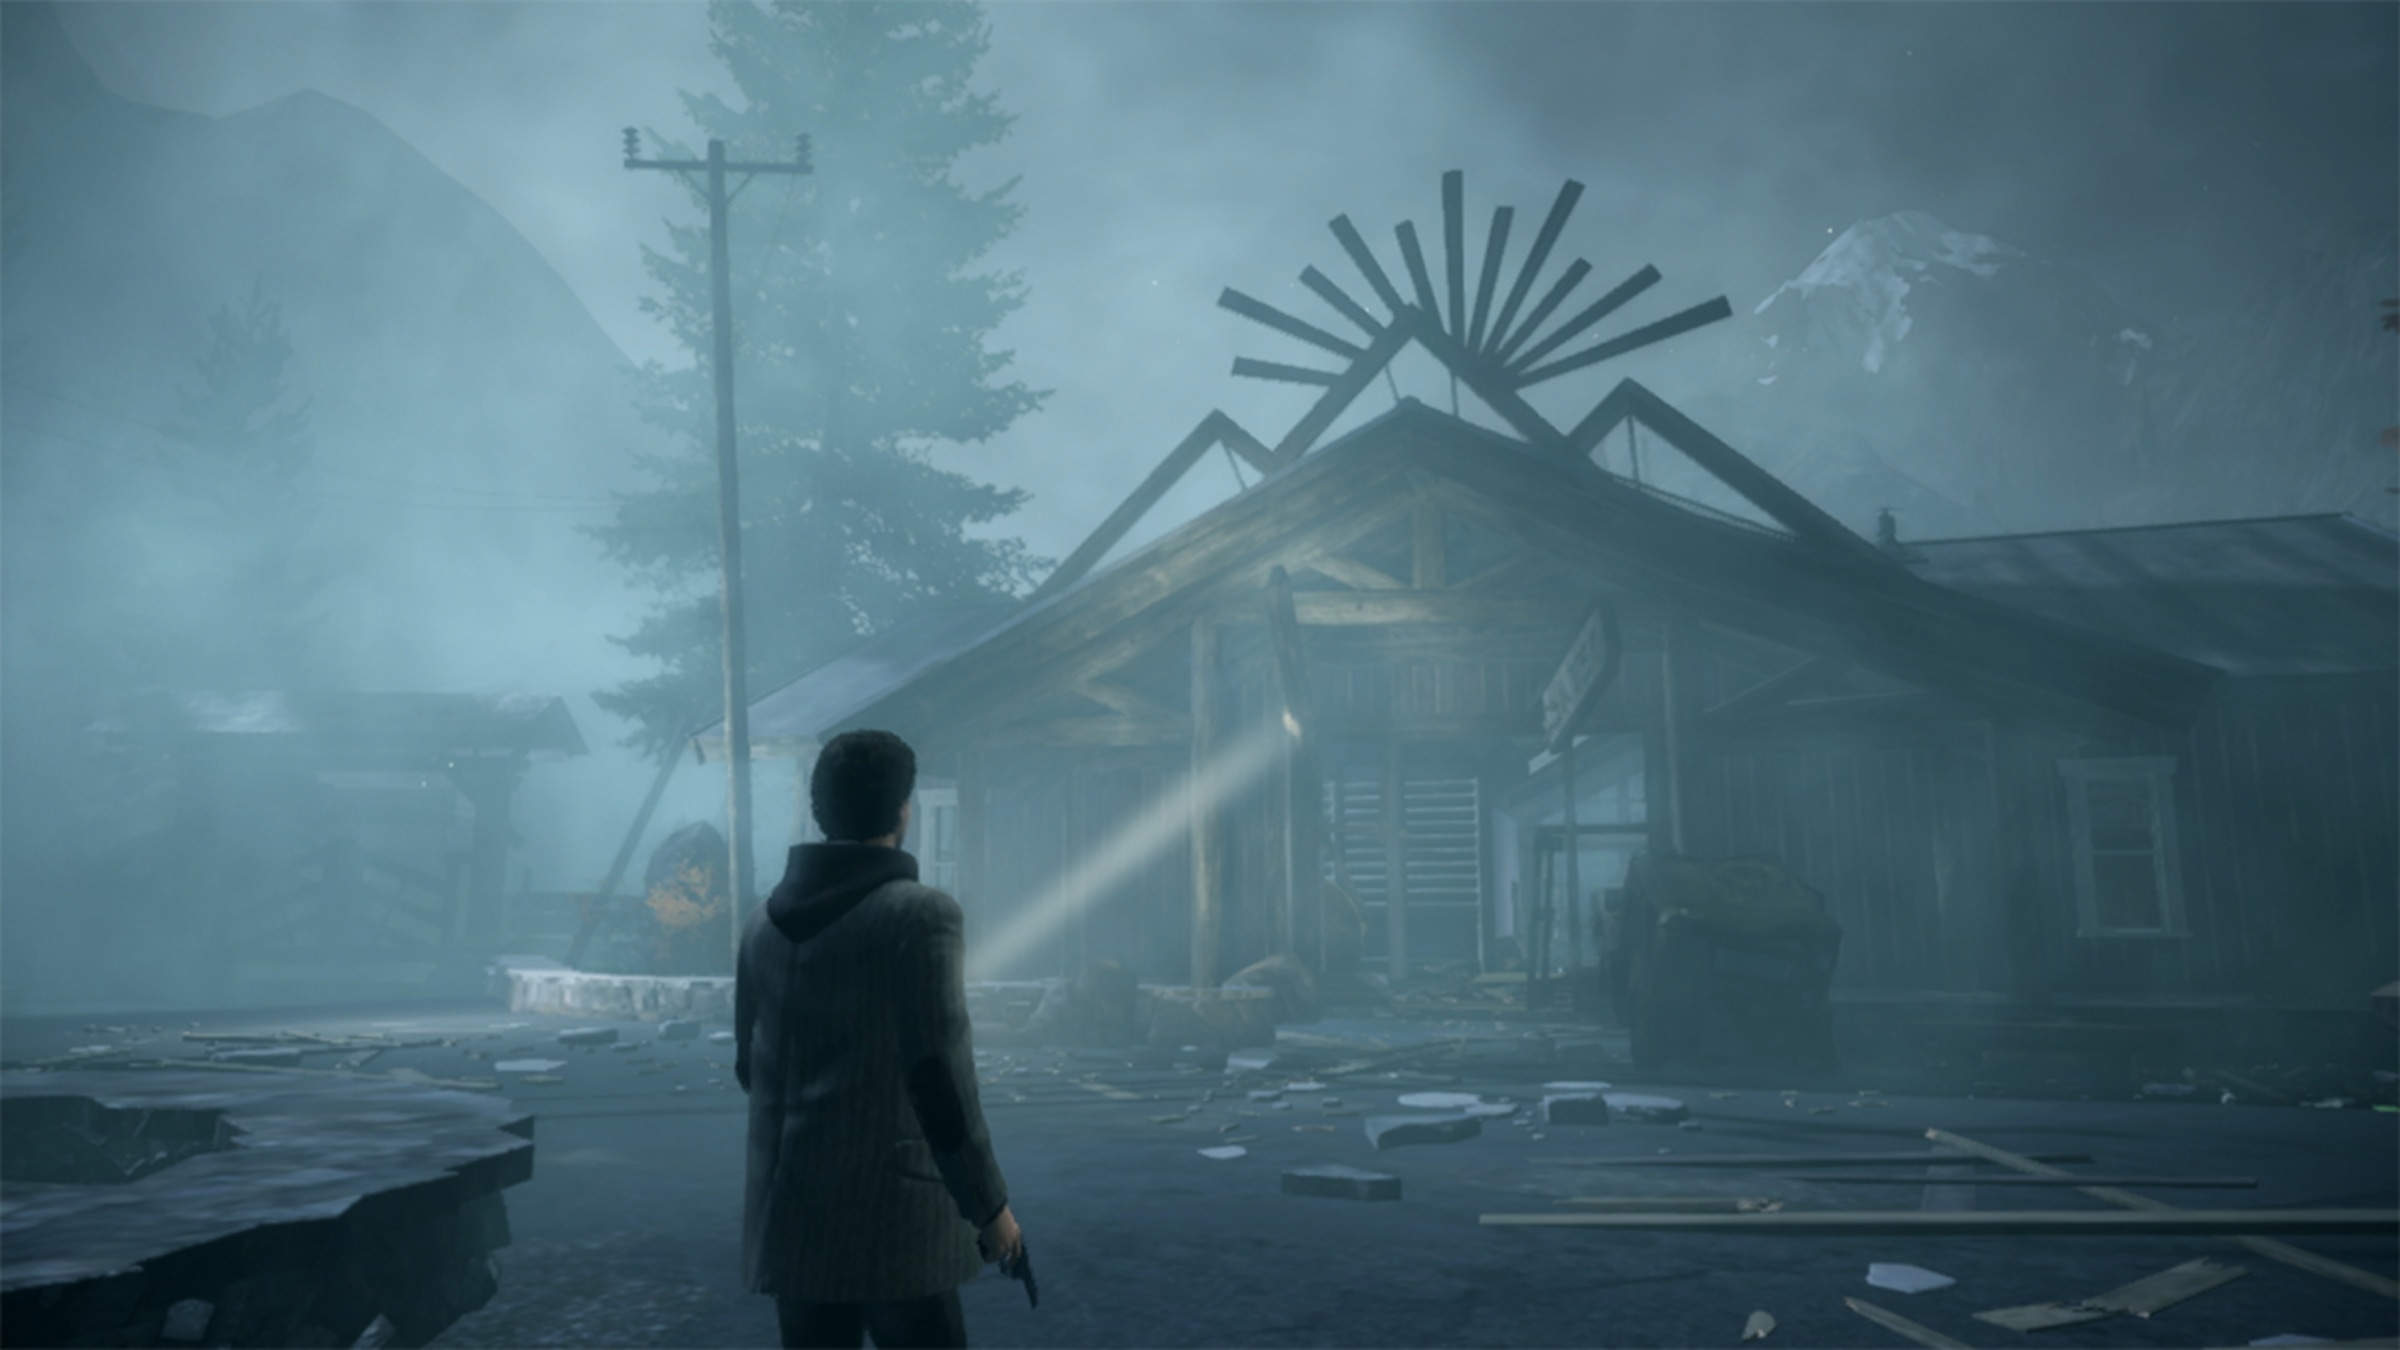 https://assets.nintendo.com/image/upload/c_fill,w_1200/q_auto:best/f_auto/dpr_2.0/ncom/en_US/games/switch/a/alan-wake-remastered-switch/